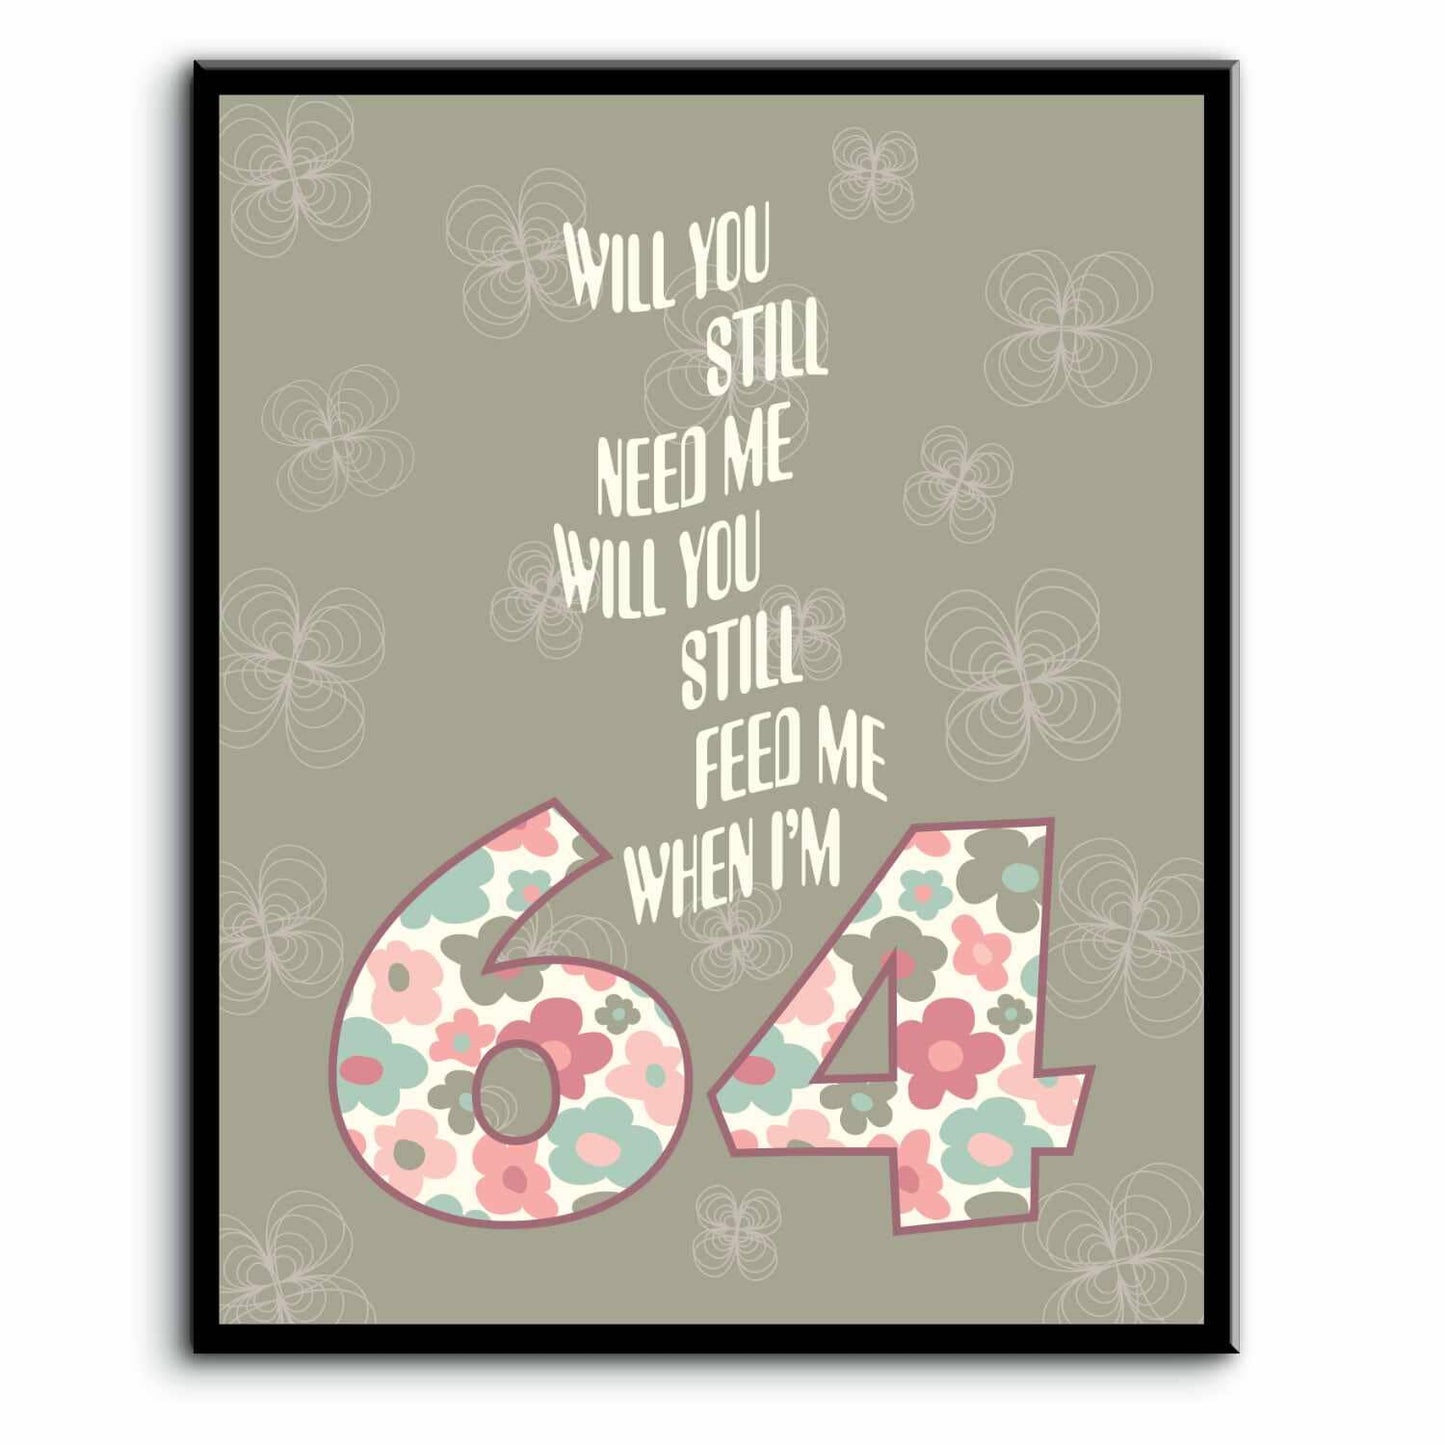 When I'm Sixty-Four 64 by the Beatles - Song Lyric Art Print Song Lyrics Art Song Lyrics Art 8x10 Plaque Mount 